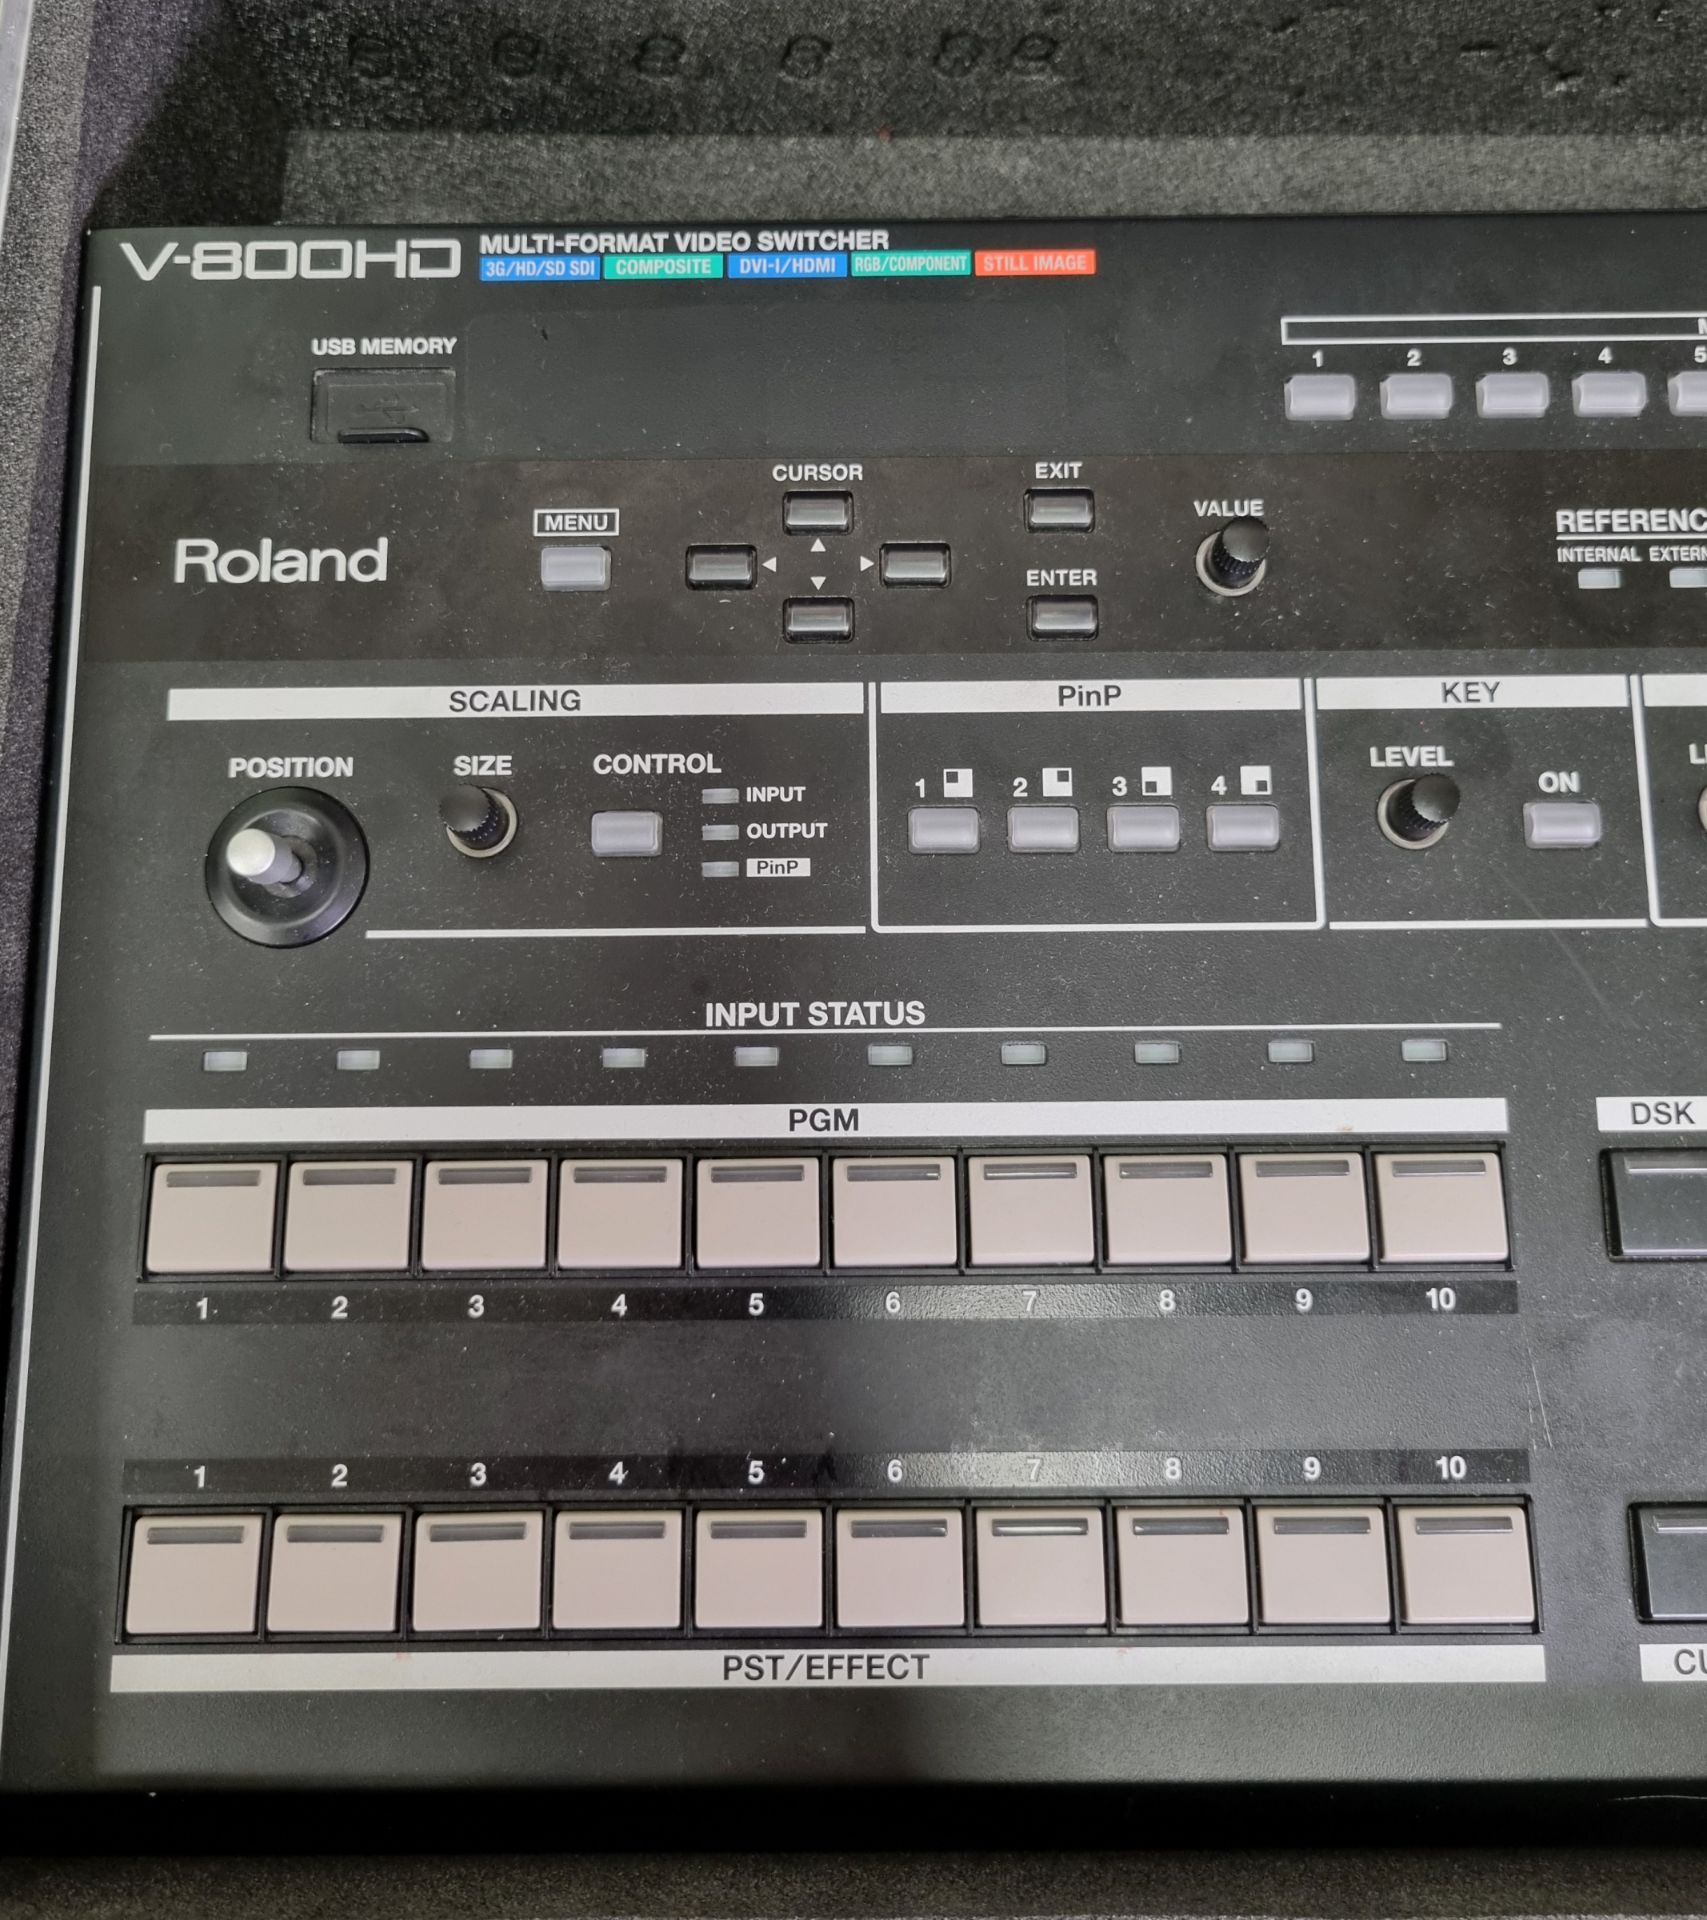 Roland V-800HD multi-format video switcher with flight case - FAULTY (OUTPUT 3/4 FREEZING) - Image 4 of 9